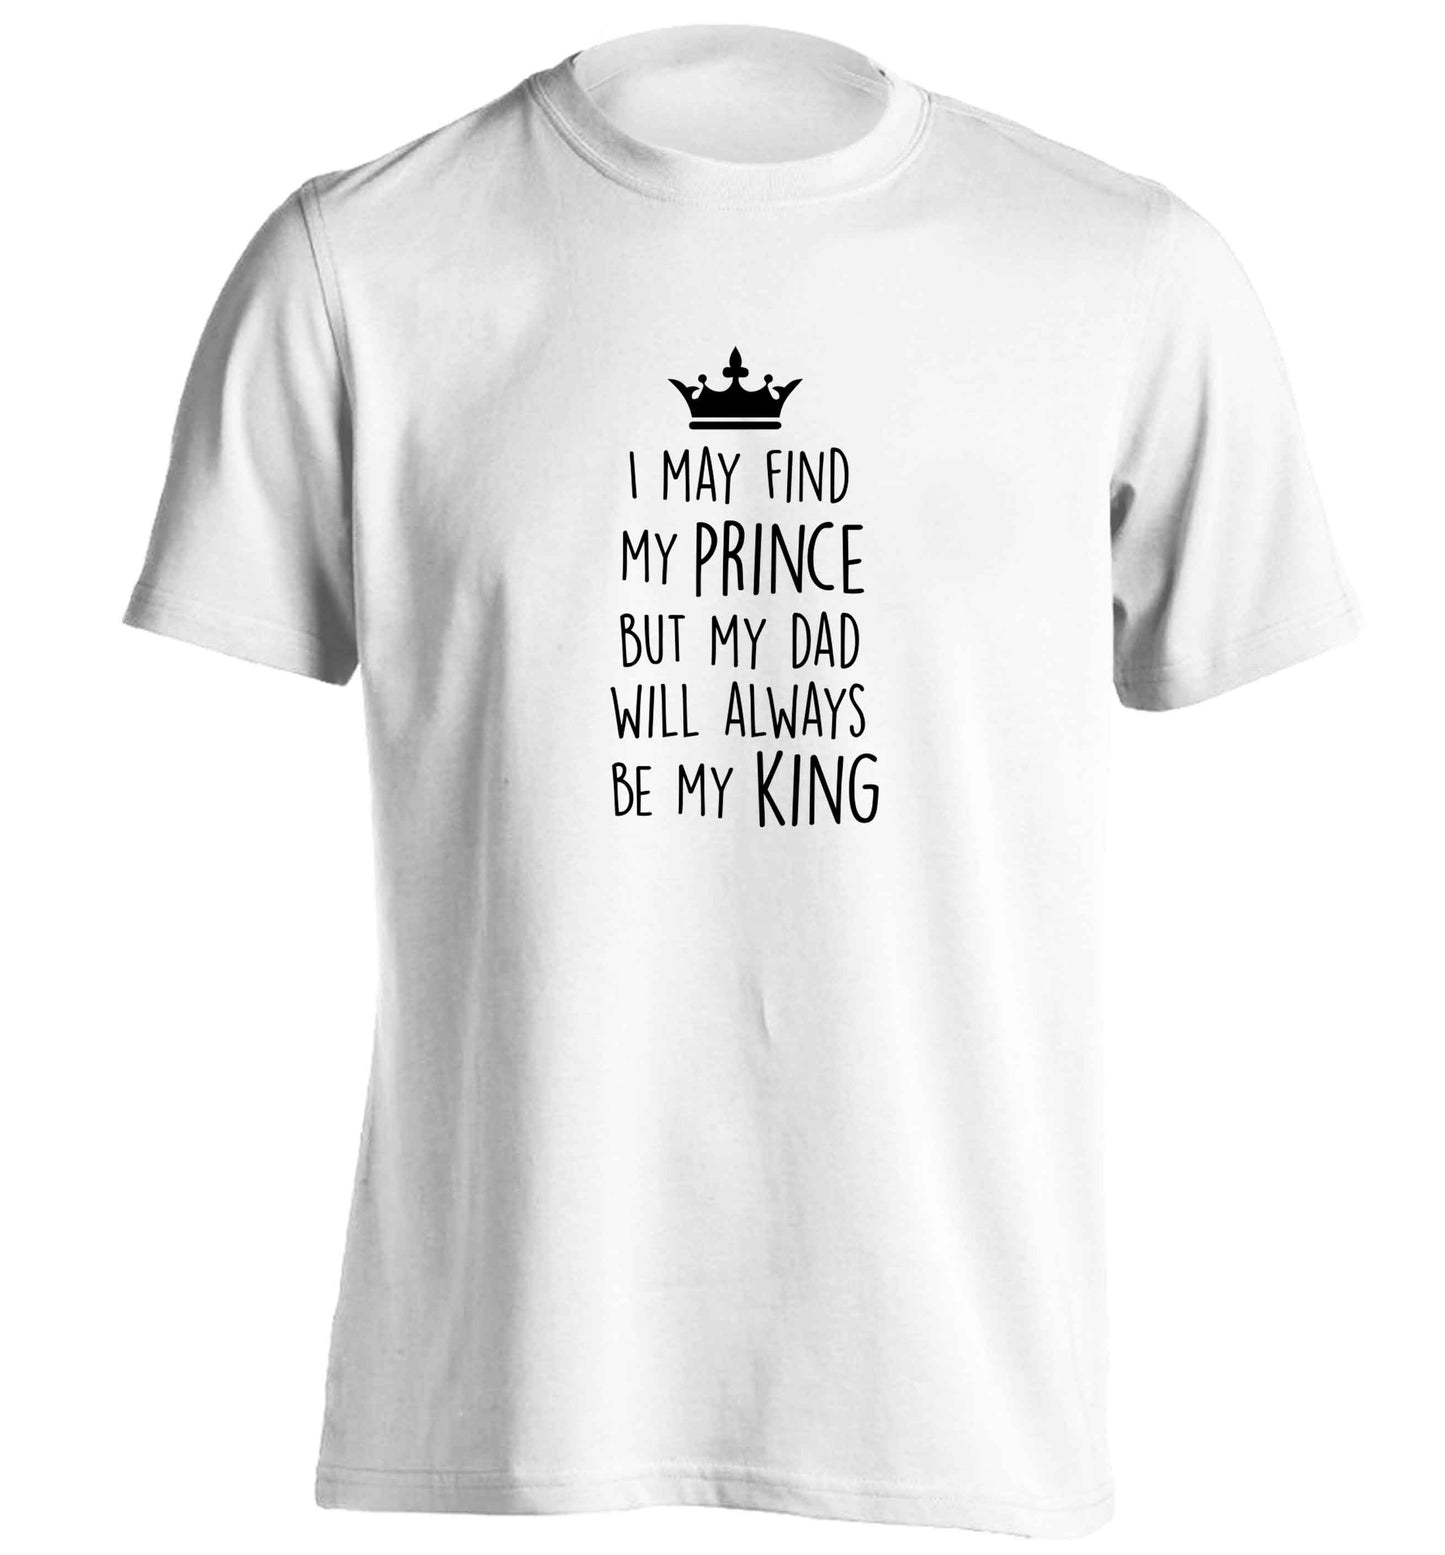 I may find my prince but my dad will always be my king adults unisex white Tshirt 2XL